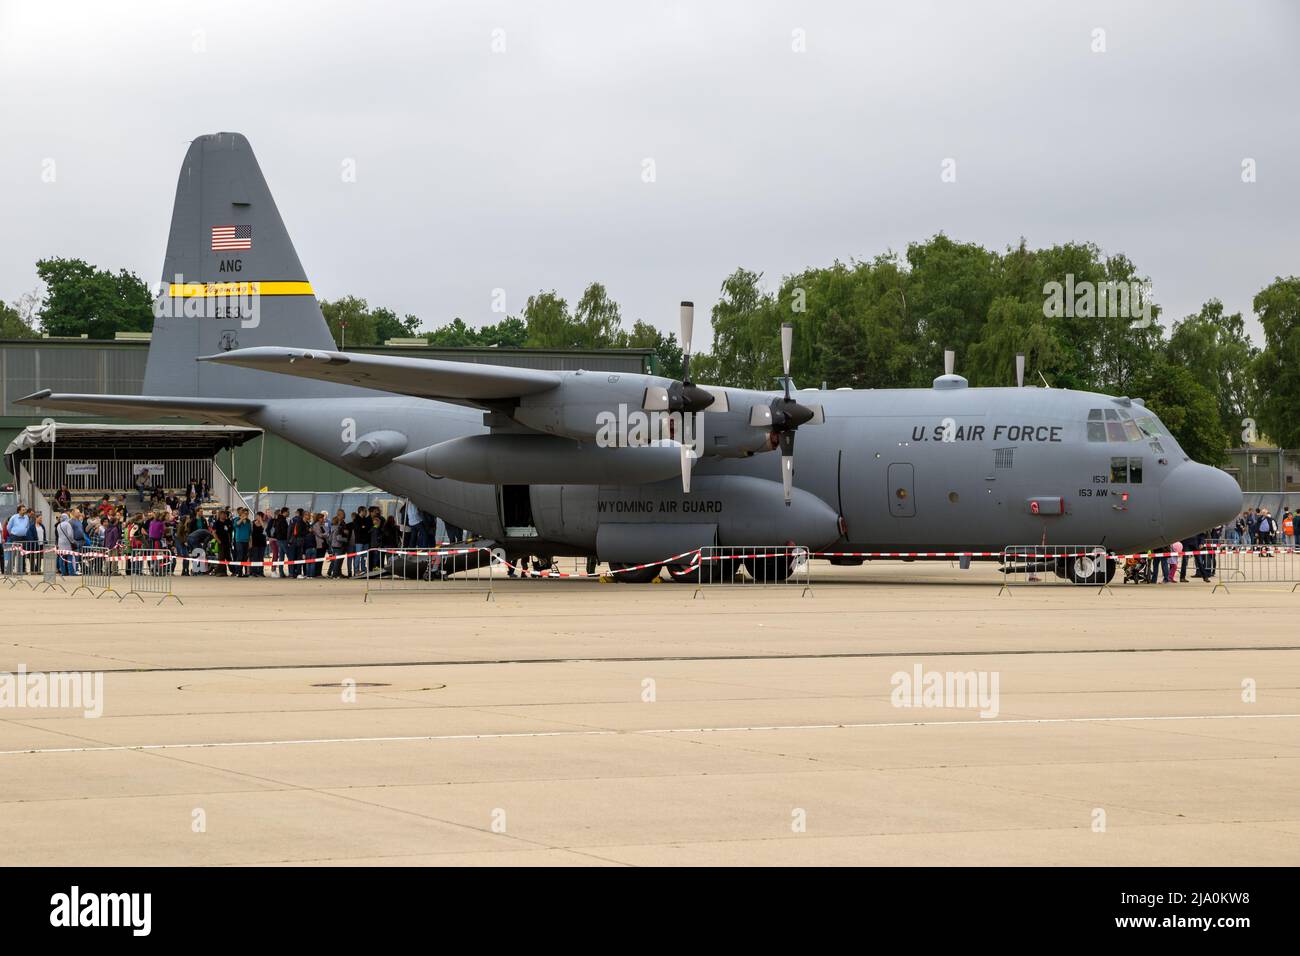 Lockheed C-130H Hercules transport plane of the 153d Airlift Wing of Wyoming Air Guard on display at the NATO Geilenkirchen Open House. Germany - July Stock Photo